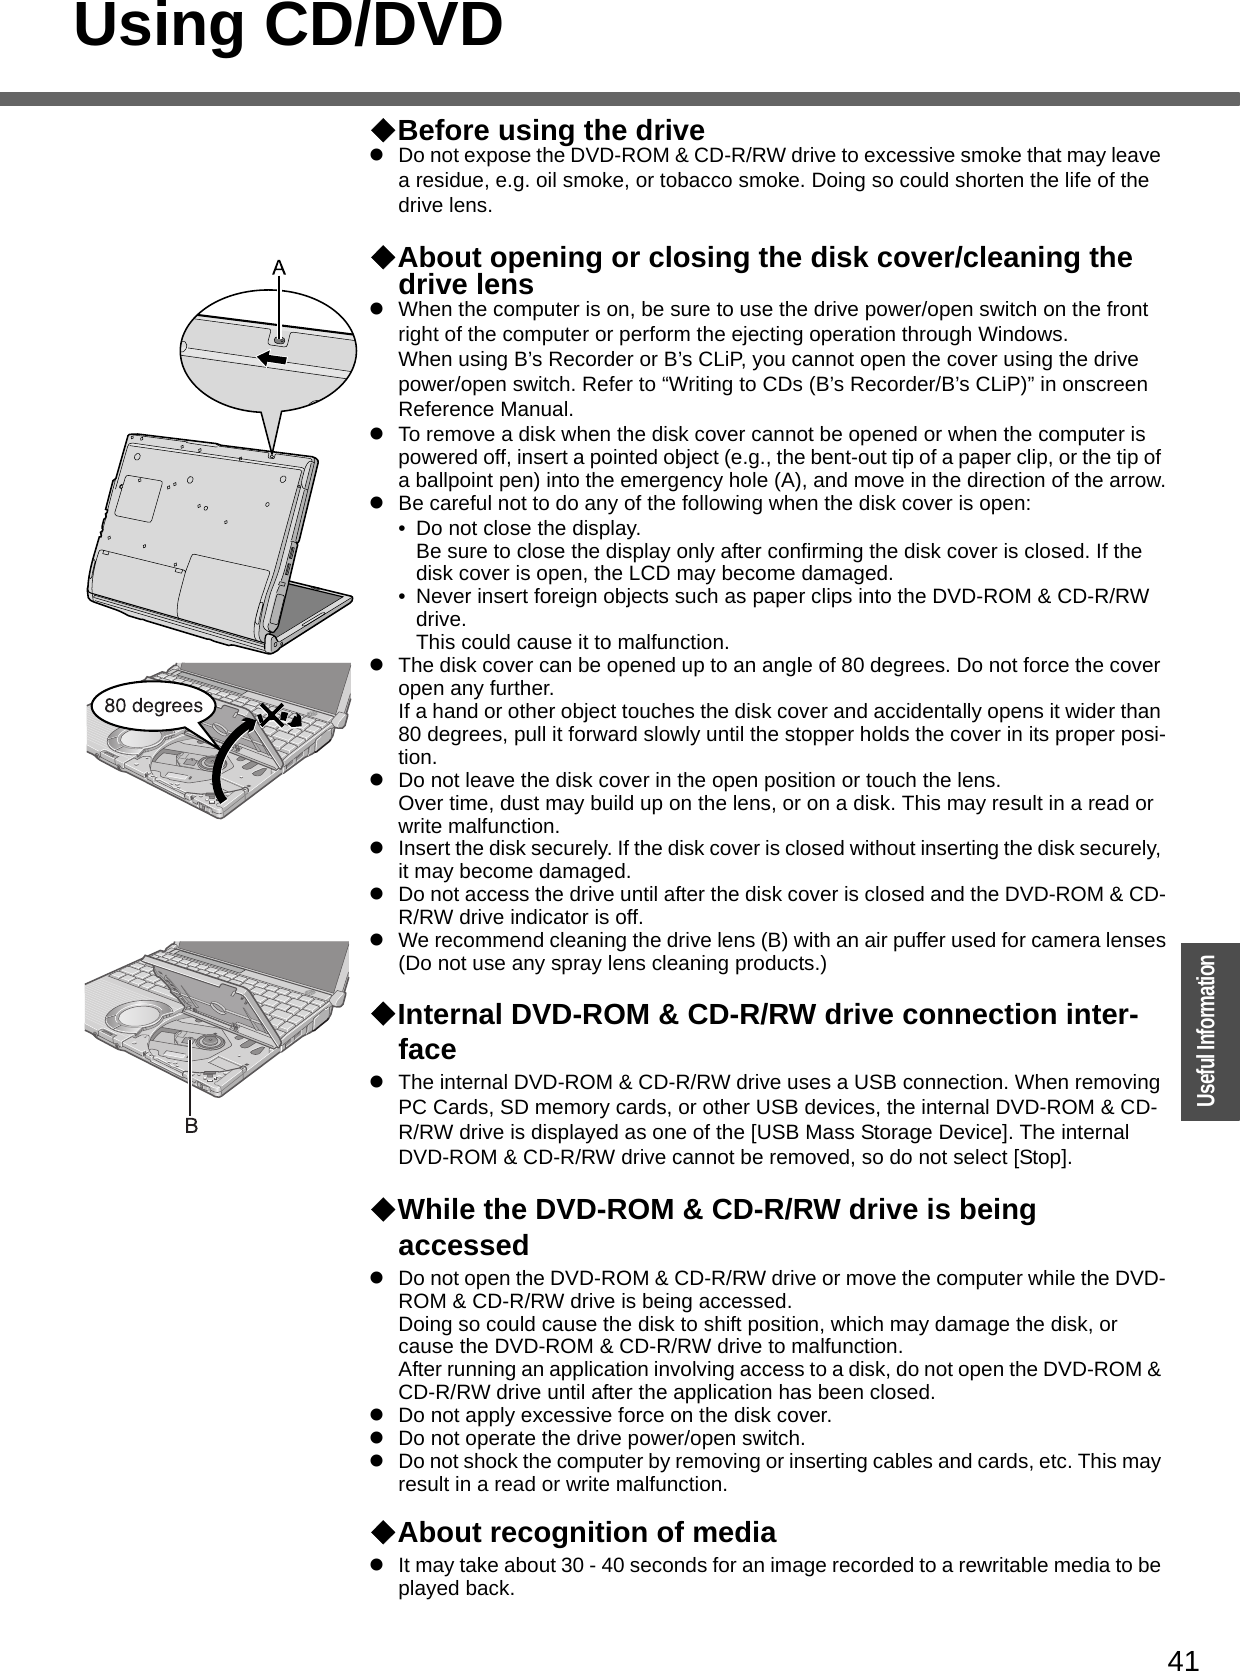 41OperationUseful InformationUsing CD/DVDBefore using the drivezDo not expose the DVD-ROM &amp; CD-R/RW drive to excessive smoke that may leave a residue, e.g. oil smoke, or tobacco smoke. Doing so could shorten the life of the drive lens.About opening or closing the disk cover/cleaning the drive lenszWhen the computer is on, be sure to use the drive power/open switch on the front right of the computer or perform the ejecting operation through Windows.When using B’s Recorder or B’s CLiP, you cannot open the cover using the drive power/open switch. Refer to “Writing to CDs (B’s Recorder/B’s CLiP)” in onscreen Reference Manual.zTo remove a disk when the disk cover cannot be opened or when the computer is powered off, insert a pointed object (e.g., the bent-out tip of a paper clip, or the tip of a ballpoint pen) into the emergency hole (A), and move in the direction of the arrow.zBe careful not to do any of the following when the disk cover is open:• Do not close the display.Be sure to close the display only after confirming the disk cover is closed. If the disk cover is open, the LCD may become damaged.• Never insert foreign objects such as paper clips into the DVD-ROM &amp; CD-R/RW drive. This could cause it to malfunction.zThe disk cover can be opened up to an angle of 80 degrees. Do not force the cover open any further.If a hand or other object touches the disk cover and accidentally opens it wider than 80 degrees, pull it forward slowly until the stopper holds the cover in its proper posi-tion.zDo not leave the disk cover in the open position or touch the lens.Over time, dust may build up on the lens, or on a disk. This may result in a read or write malfunction.zInsert the disk securely. If the disk cover is closed without inserting the disk securely, it may become damaged.zDo not access the drive until after the disk cover is closed and the DVD-ROM &amp; CD-R/RW drive indicator is off.zWe recommend cleaning the drive lens (B) with an air puffer used for camera lenses(Do not use any spray lens cleaning products.)Internal DVD-ROM &amp; CD-R/RW drive connection inter-facezThe internal DVD-ROM &amp; CD-R/RW drive uses a USB connection. When removing PC Cards, SD memory cards, or other USB devices, the internal DVD-ROM &amp; CD-R/RW drive is displayed as one of the [USB Mass Storage Device]. The internal DVD-ROM &amp; CD-R/RW drive cannot be removed, so do not select [Stop].While the DVD-ROM &amp; CD-R/RW drive is being accessedzDo not open the DVD-ROM &amp; CD-R/RW drive or move the computer while the DVD-ROM &amp; CD-R/RW drive is being accessed.Doing so could cause the disk to shift position, which may damage the disk, or cause the DVD-ROM &amp; CD-R/RW drive to malfunction.After running an application involving access to a disk, do not open the DVD-ROM &amp; CD-R/RW drive until after the application has been closed.zDo not apply excessive force on the disk cover.zDo not operate the drive power/open switch.zDo not shock the computer by removing or inserting cables and cards, etc. This may result in a read or write malfunction.About recognition of mediazIt may take about 30 - 40 seconds for an image recorded to a rewritable media to be played back.